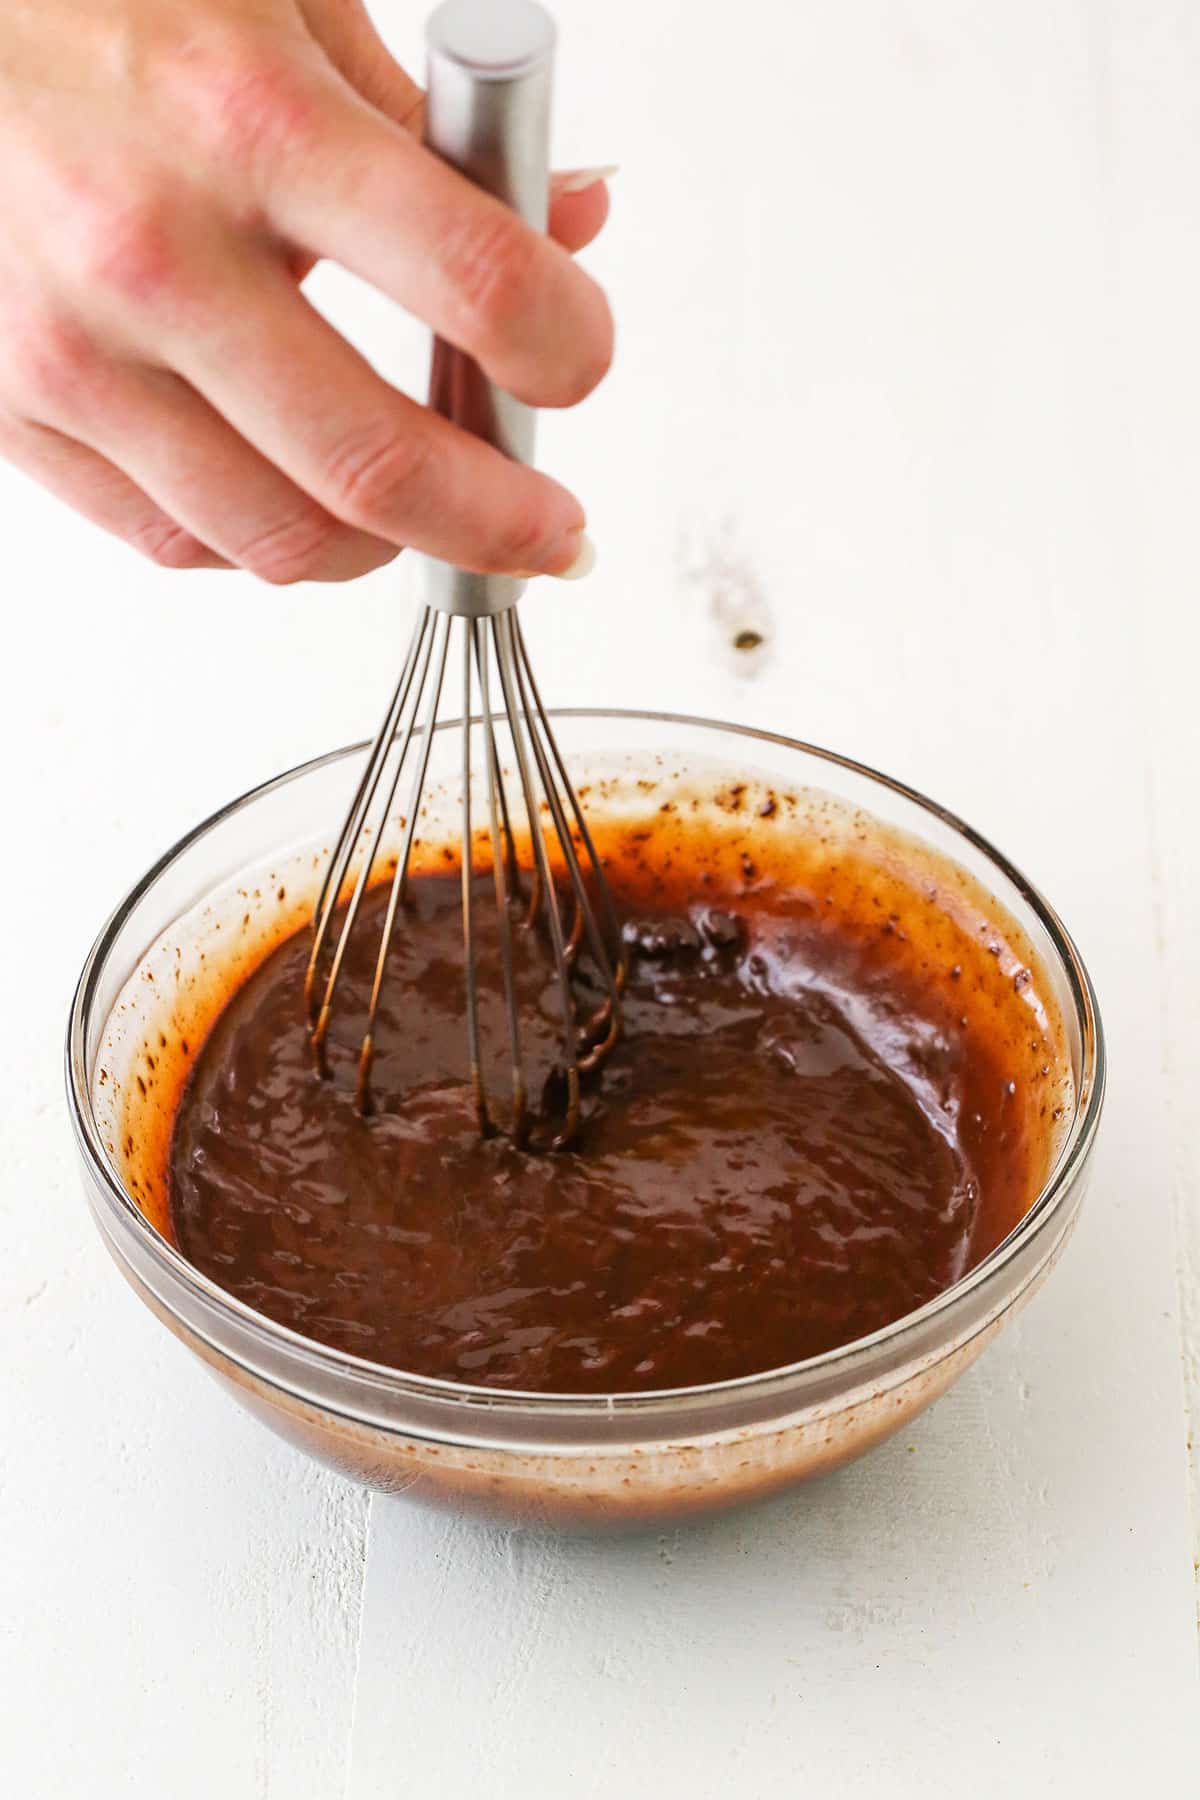 Mixing chocolate ganache using a whisk in a glass bowl